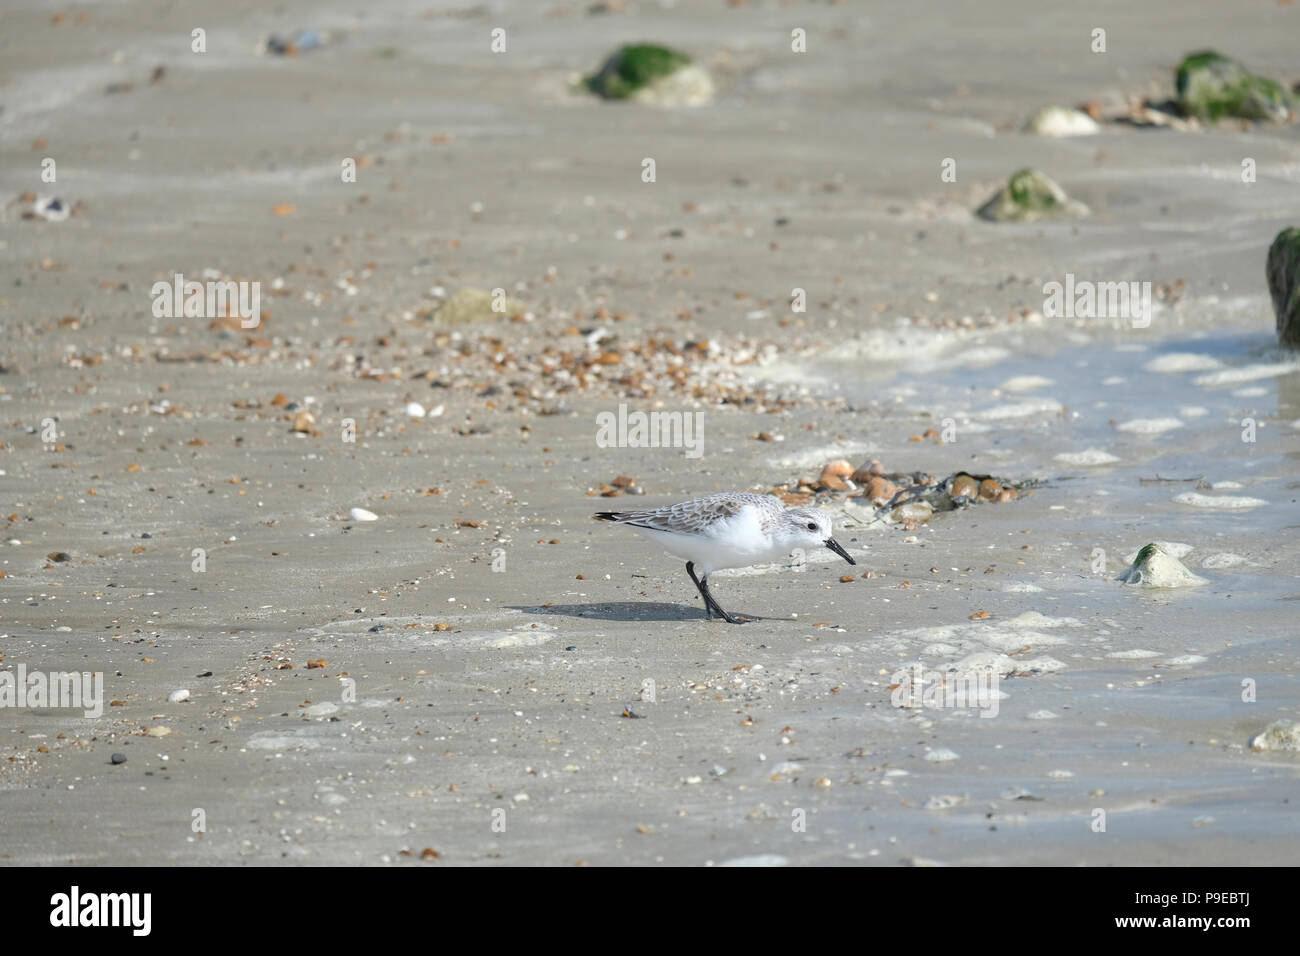 East Preston beach, UK. Solitary Sanderling searching for food on beach at low tide. Stock Photo